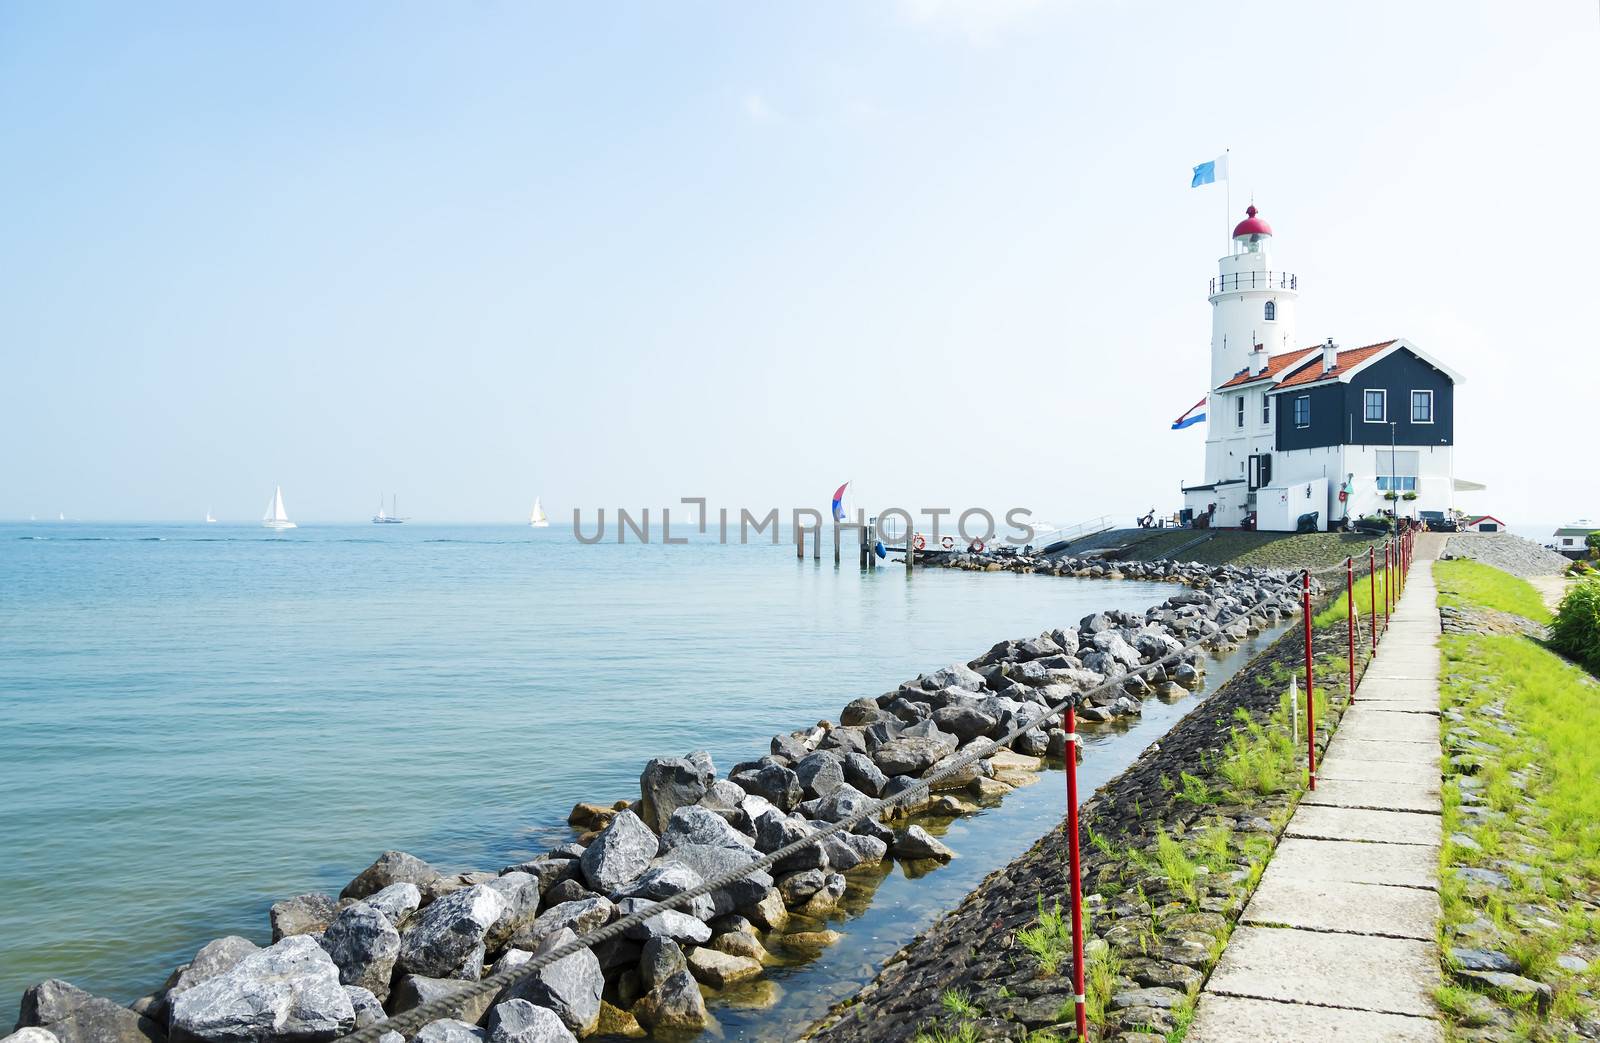 The road to lighthouse, Marken, the Netherlands by Tetyana